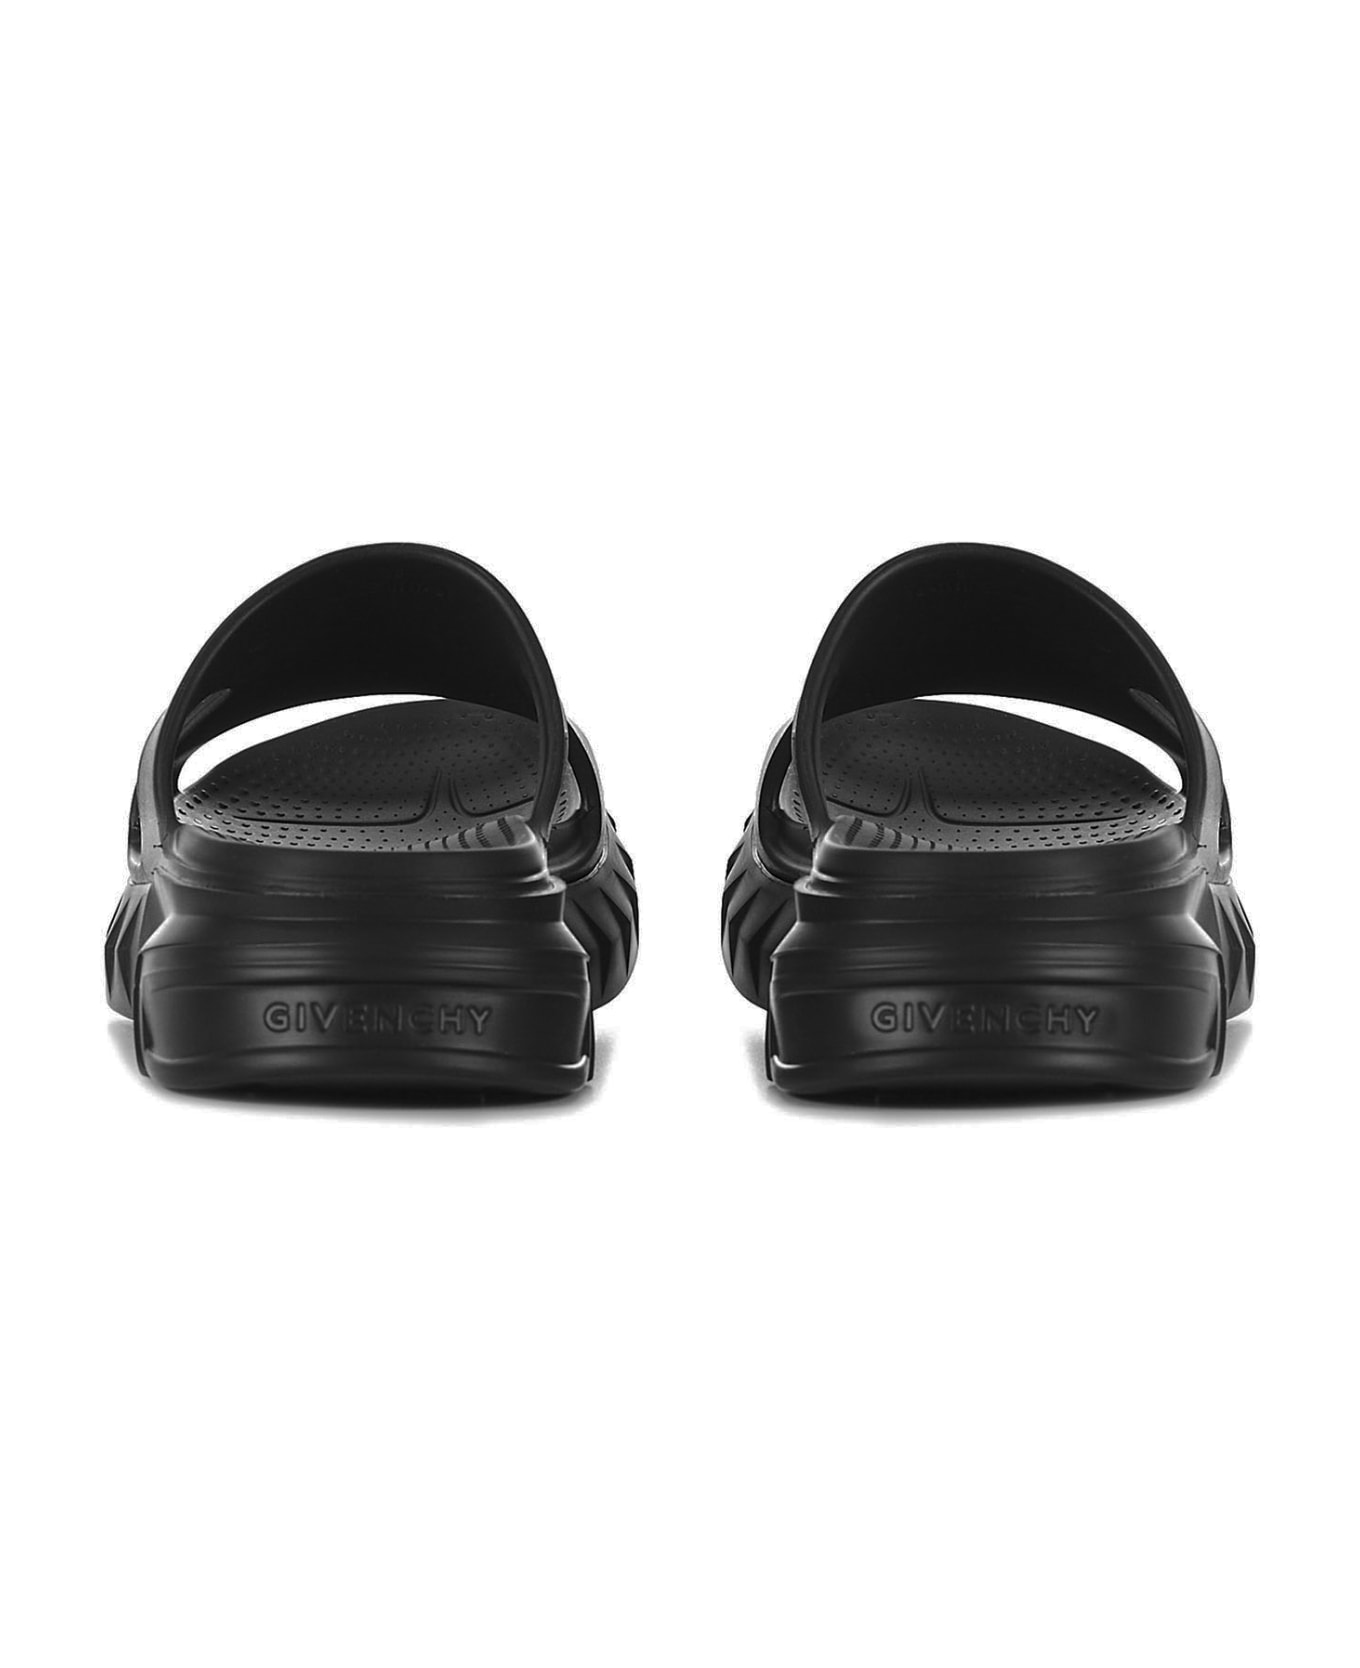 Givenchy Marshmallow Sandals - BLACK